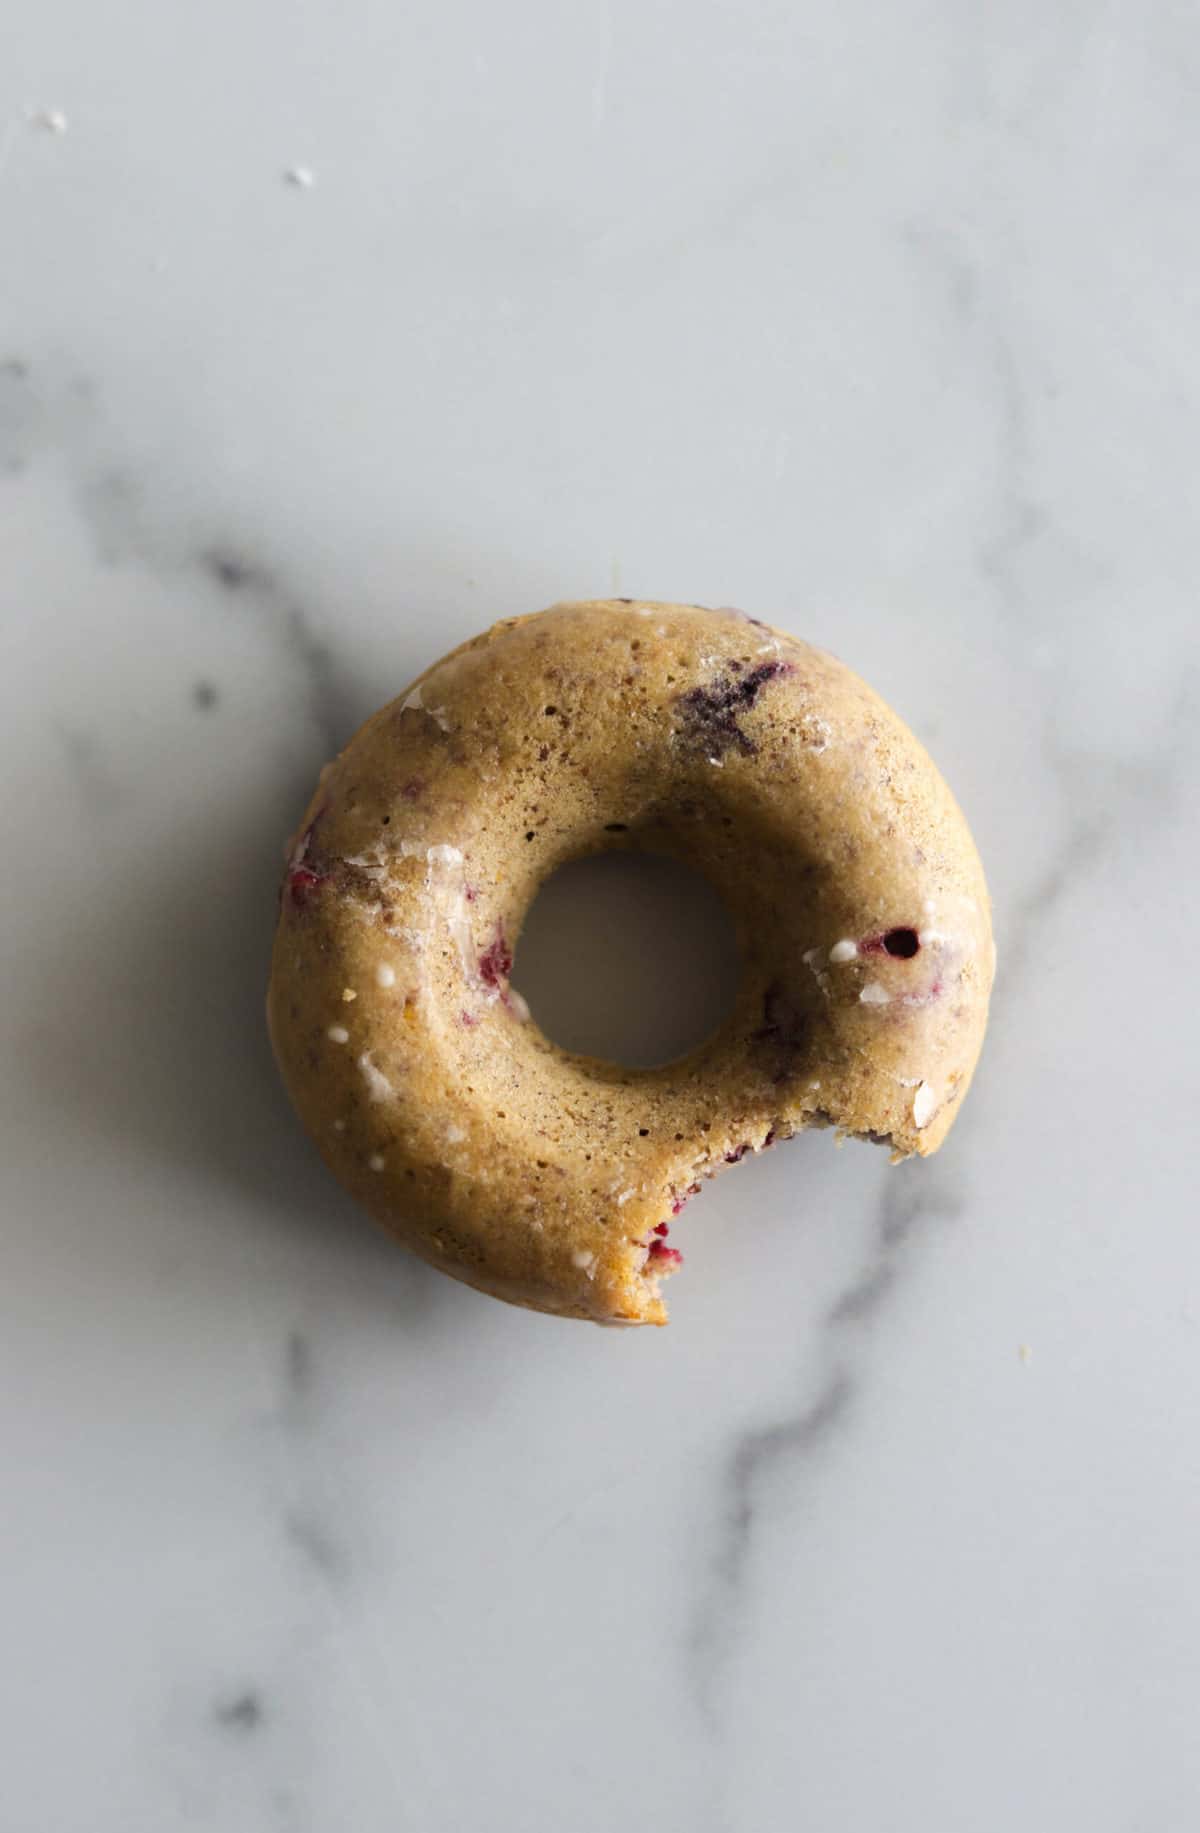 An overhead shot of one donut with a bite out of it.